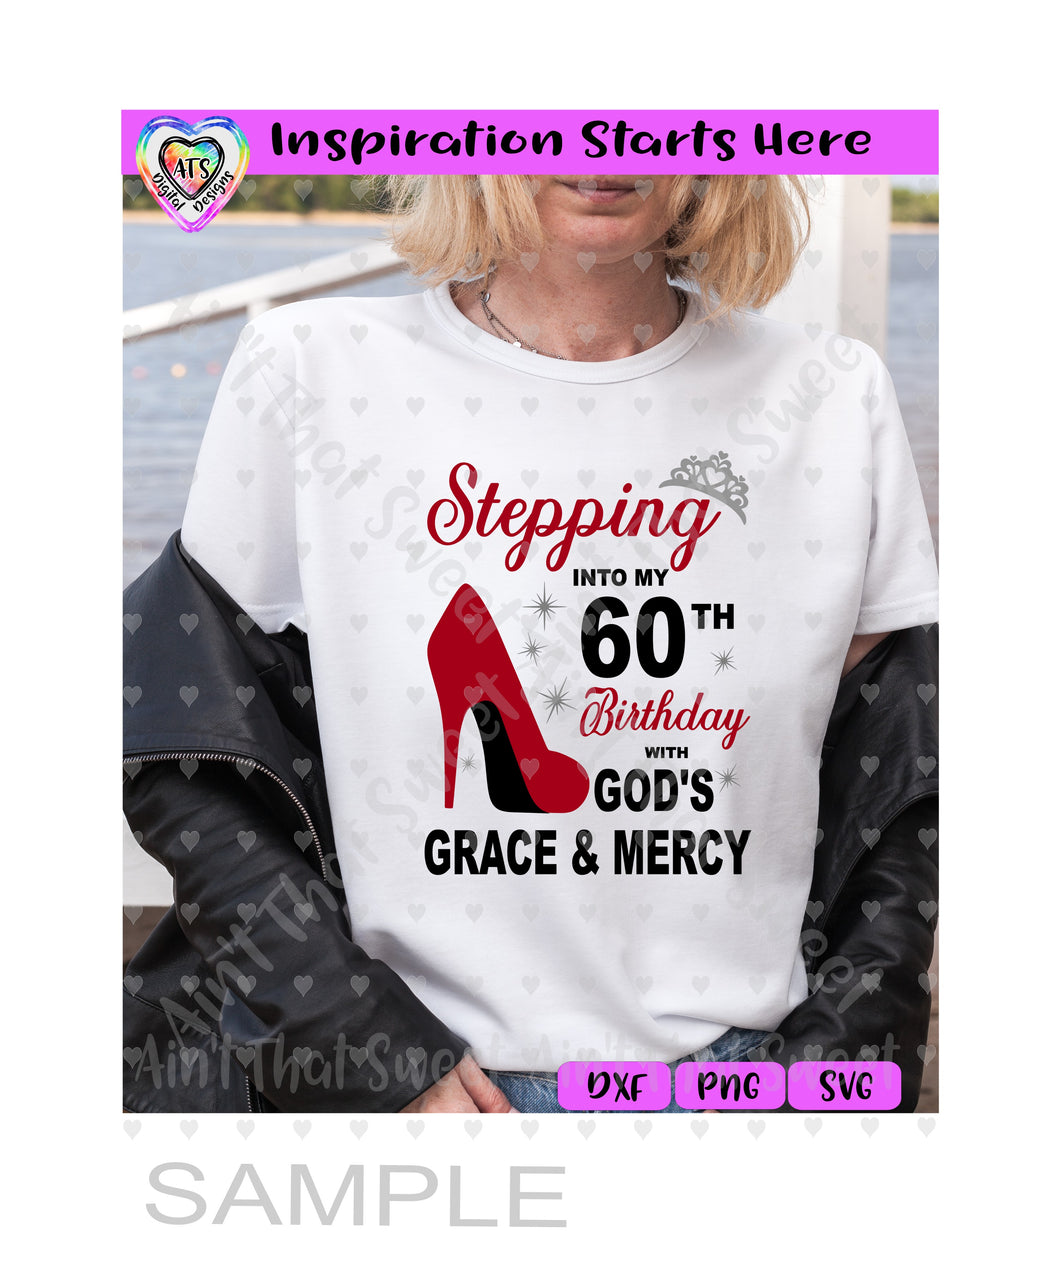 Stepping Into My 60th Birthday With God's Grace & Mercy | High Heel Shoe | Crown - Transparent PNG SVG DXF - Silhouette, Cricut, ScanNCut